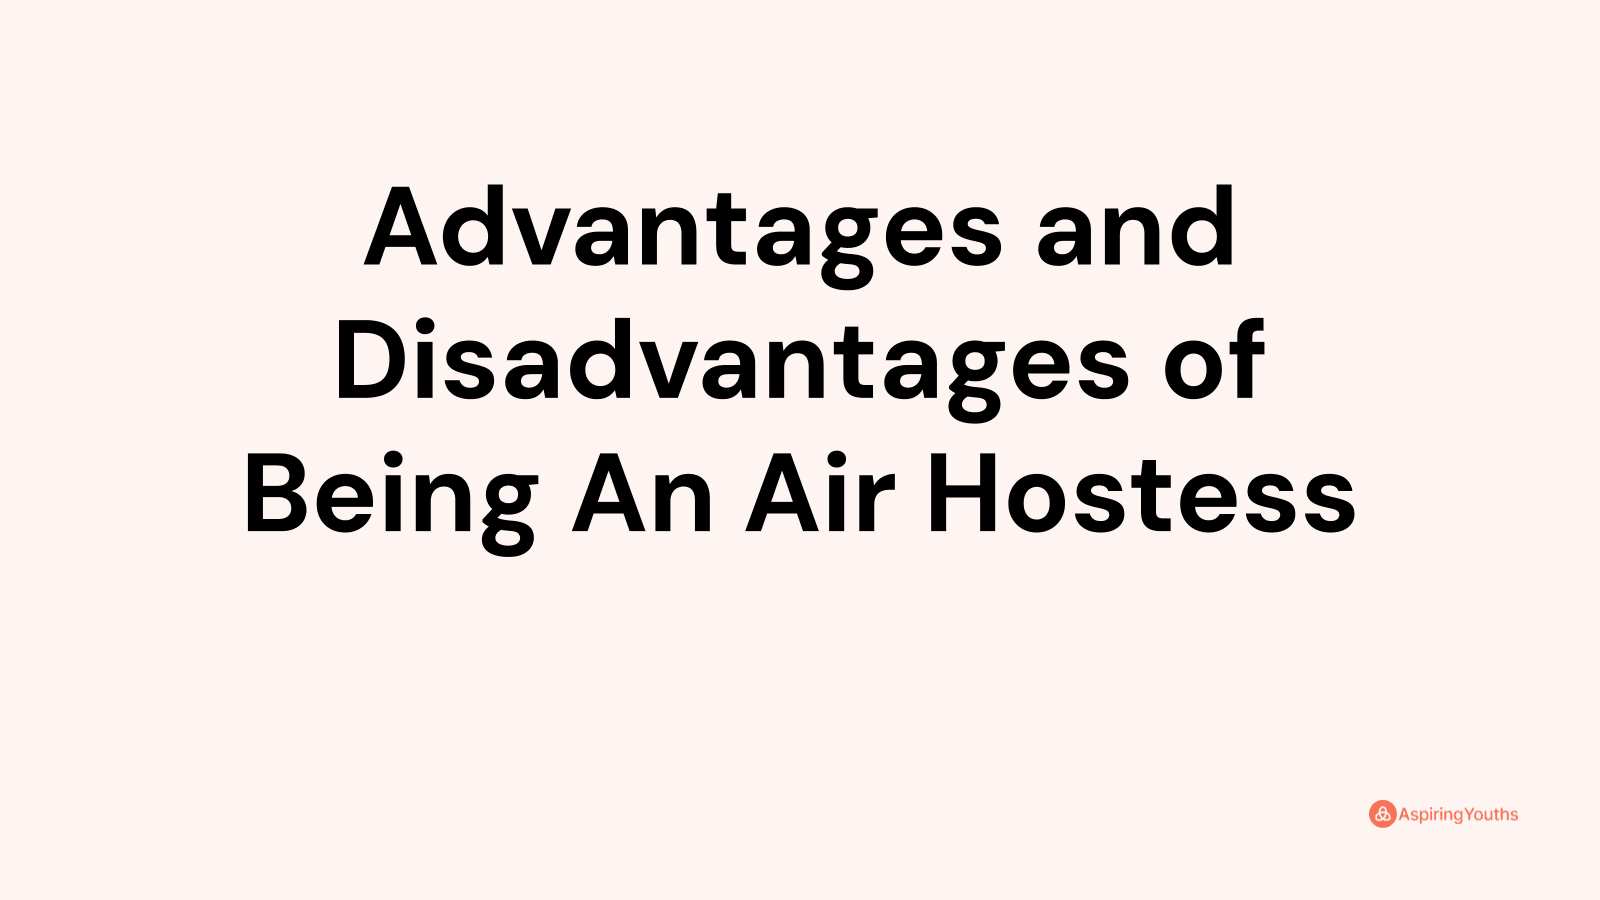 Advantages and disadvantages of Being An Air Hostess